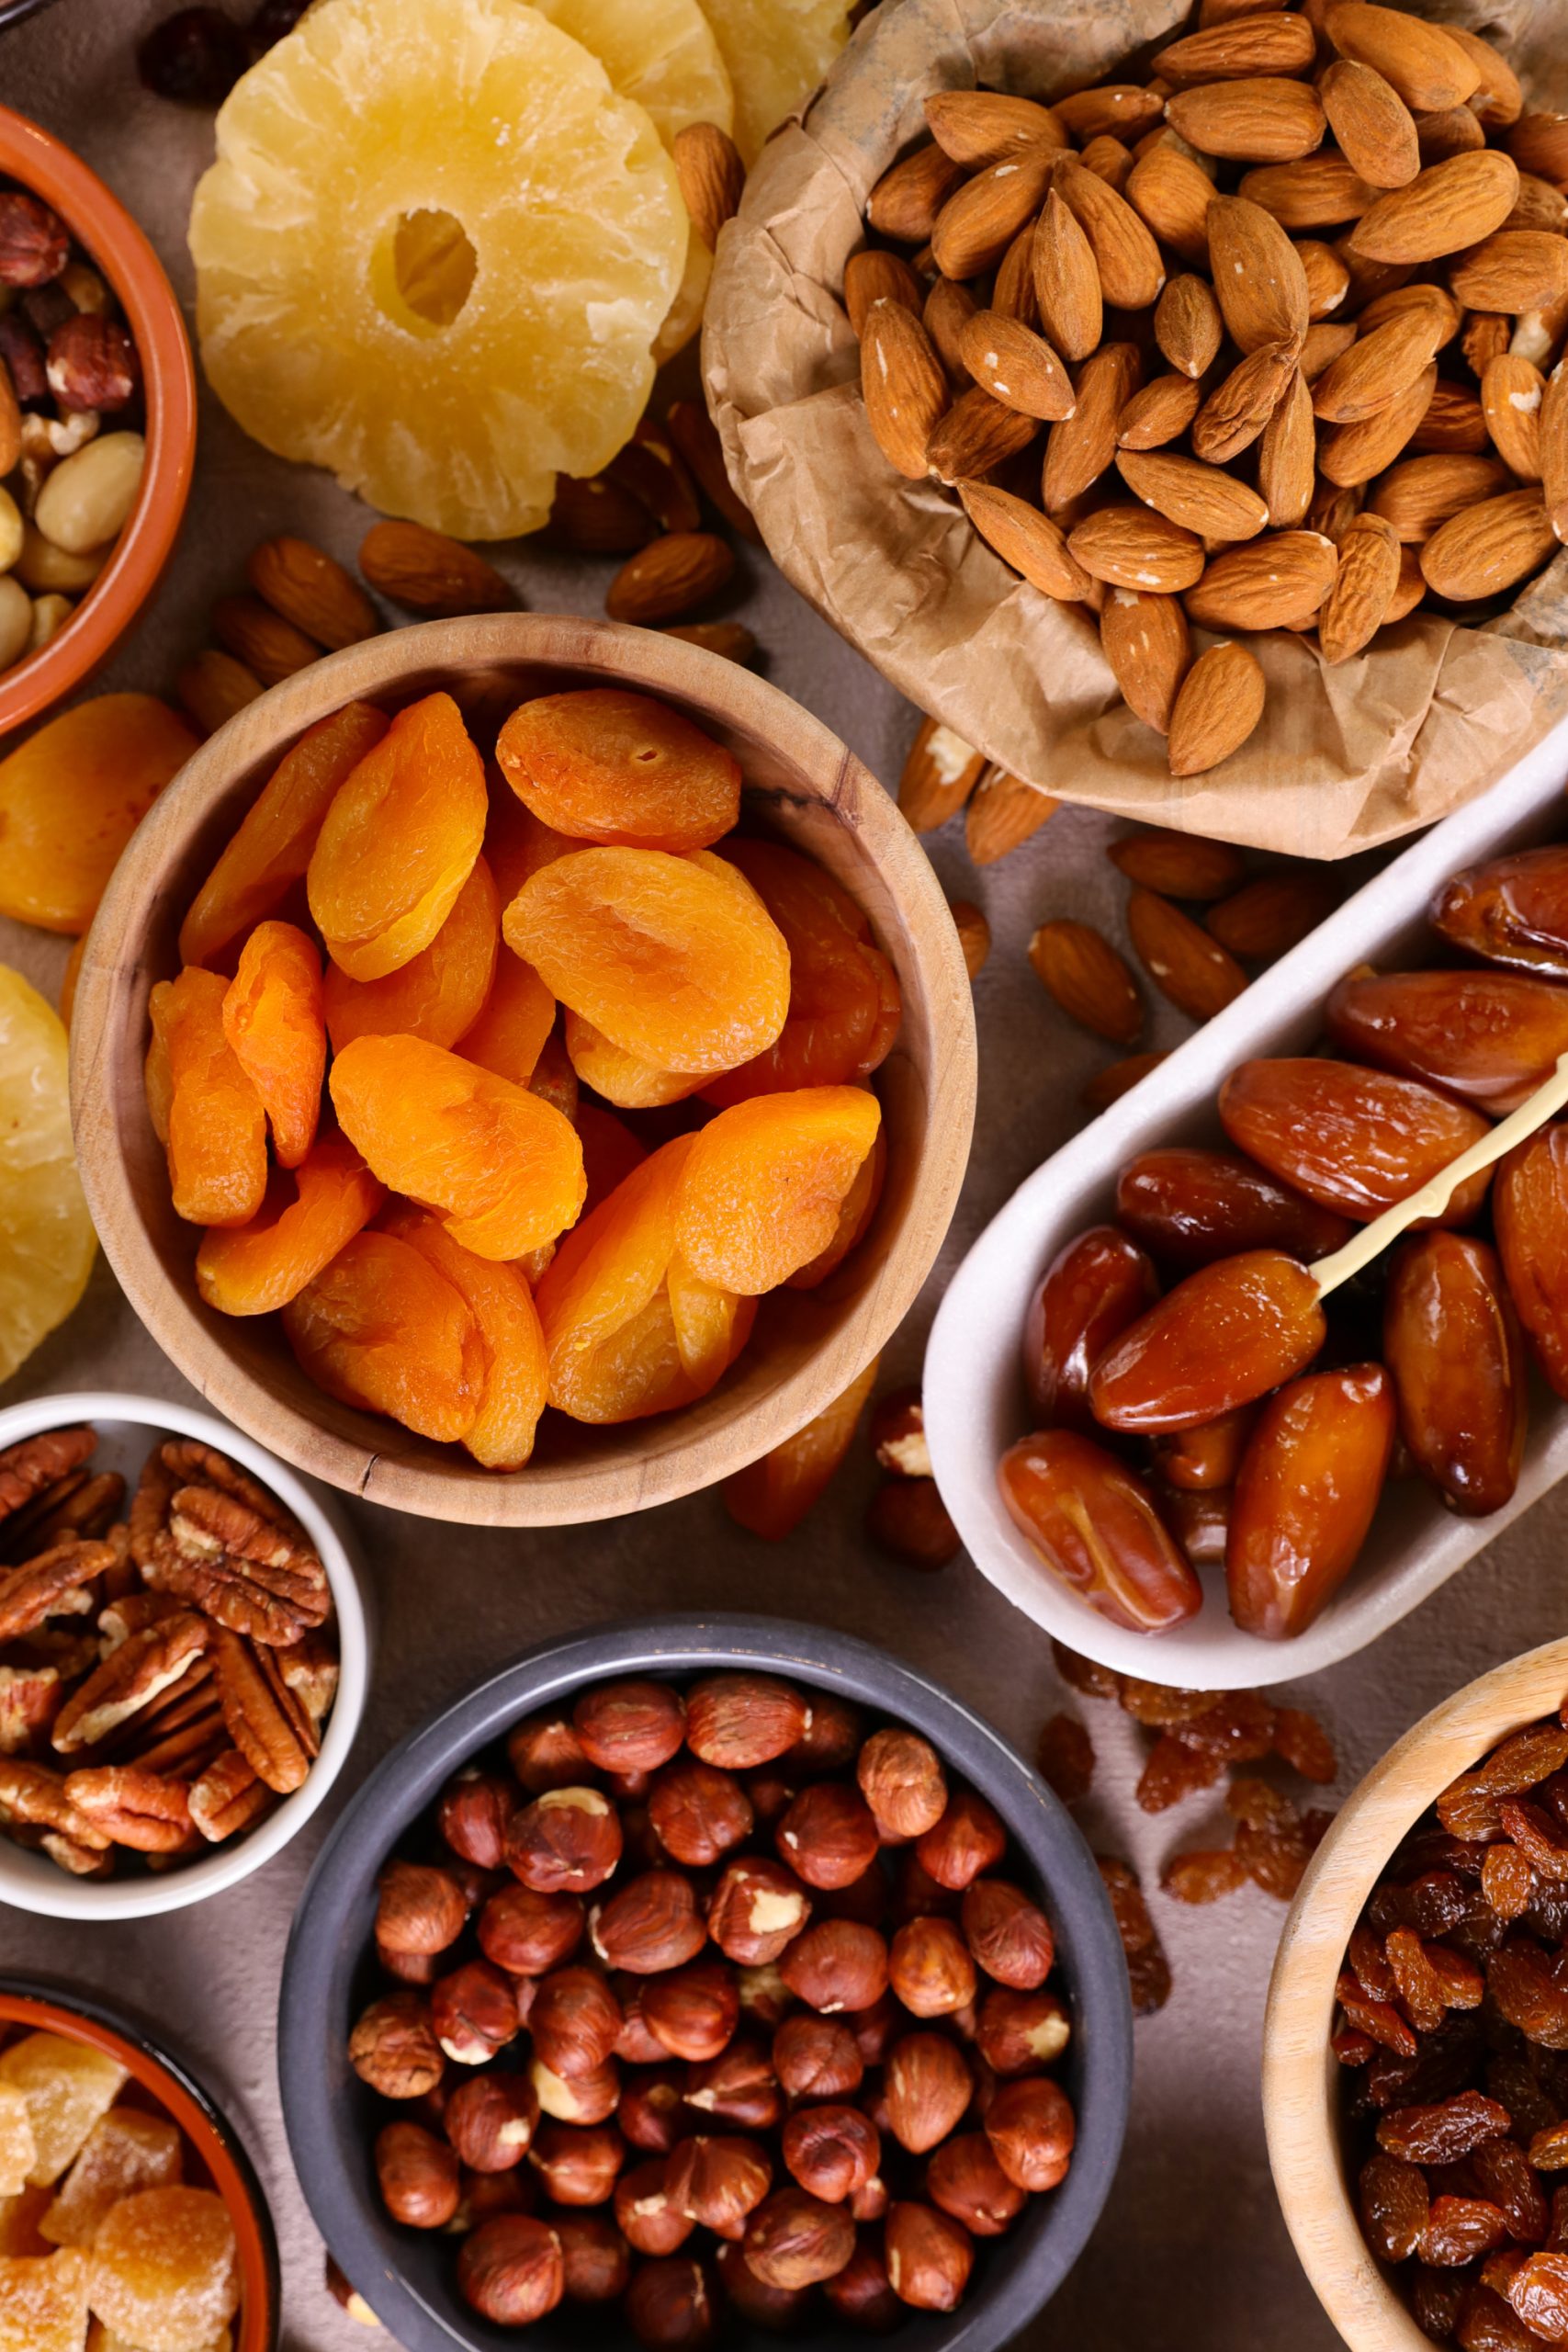 A variety of dried fruits and nuts in bowls.